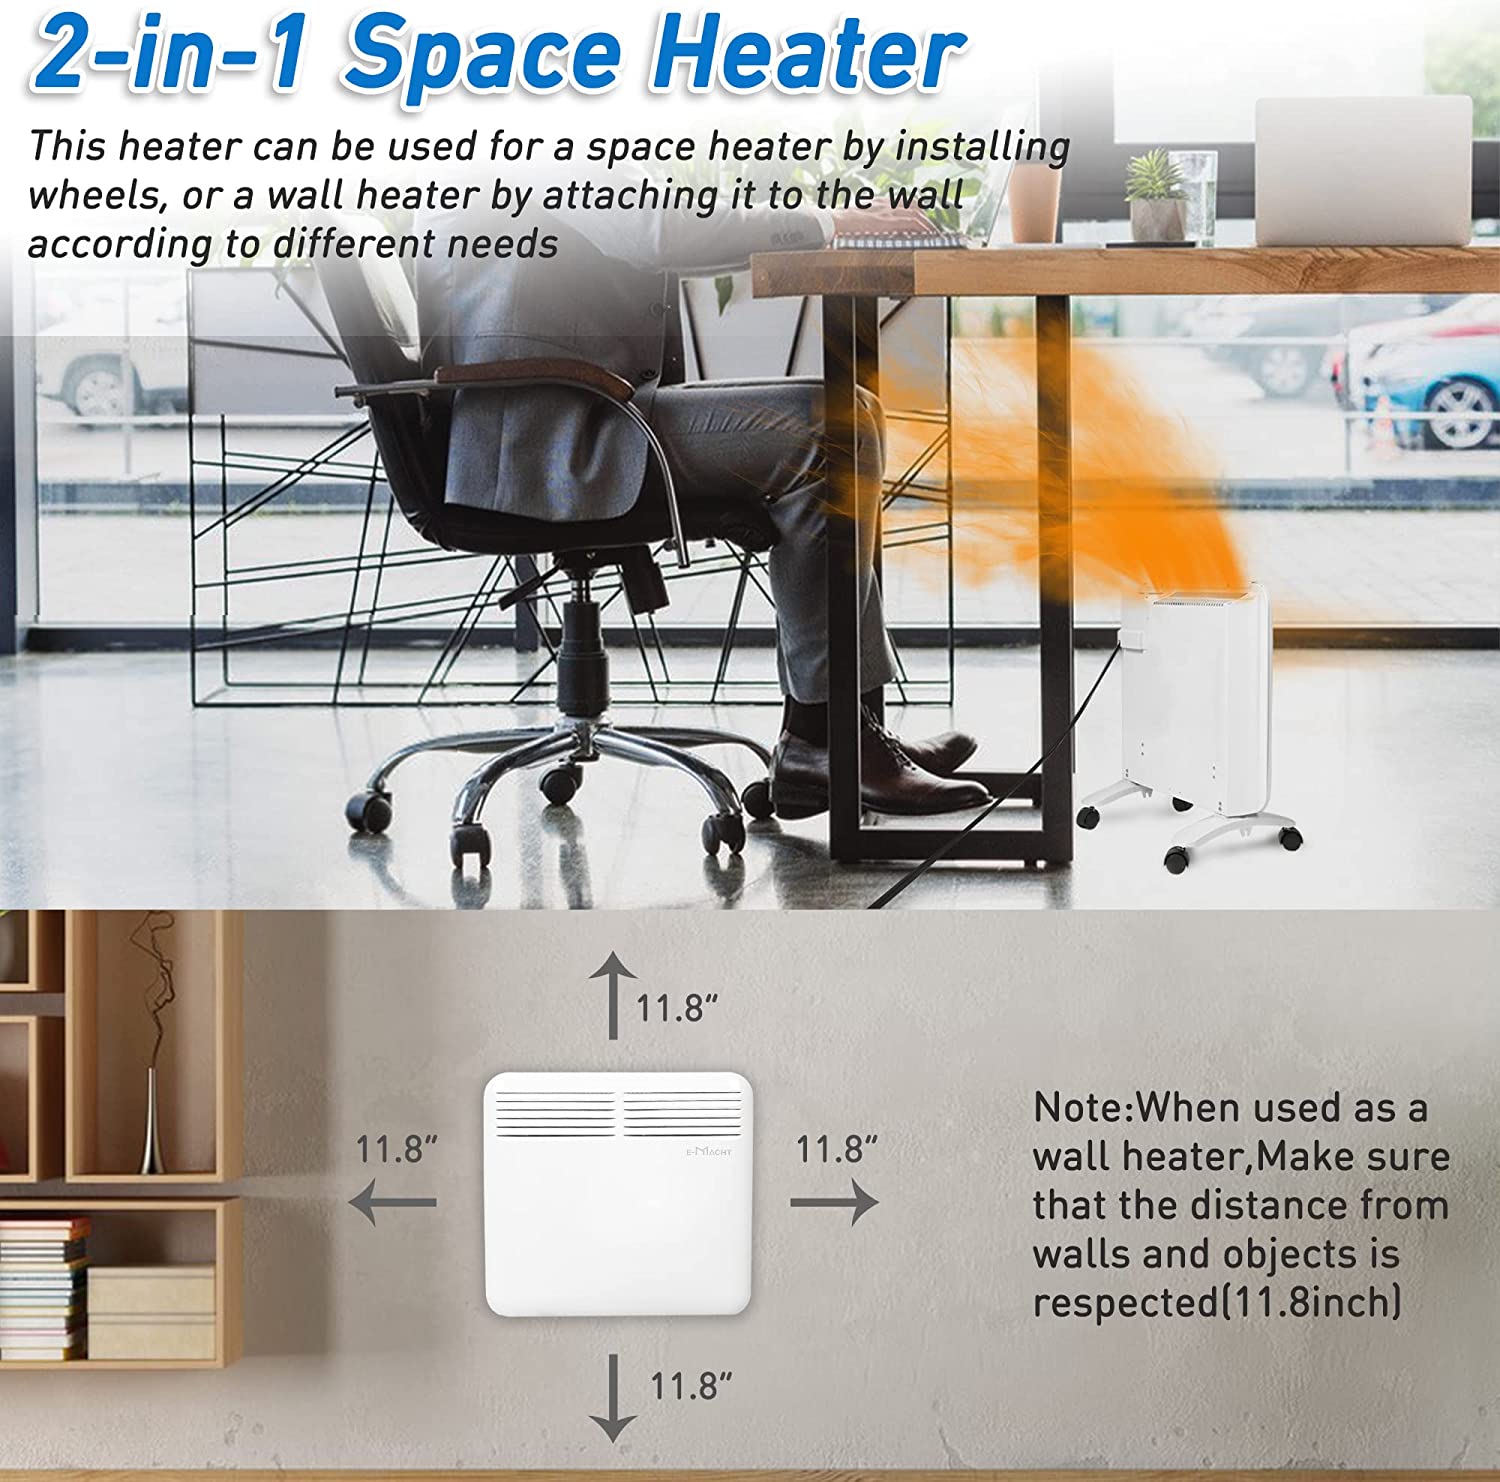 (Out of Stock) 750W Wall-Mounted Electric Space Heater with Adjustable Thermostat, Portable Convection Freestanding Heater